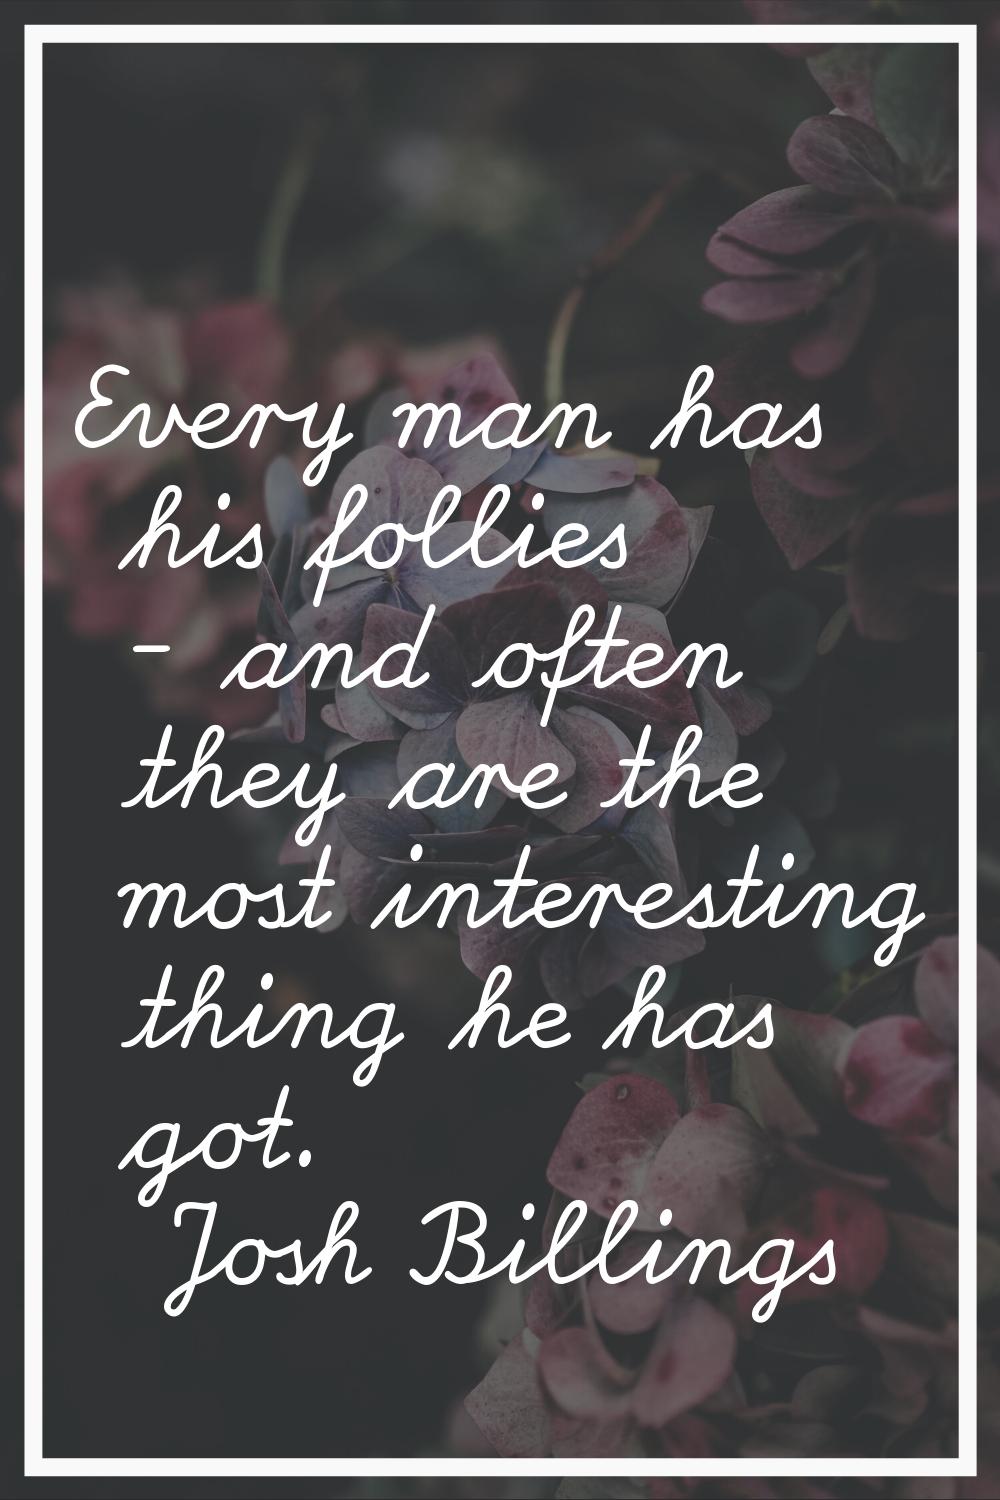 Every man has his follies - and often they are the most interesting thing he has got.